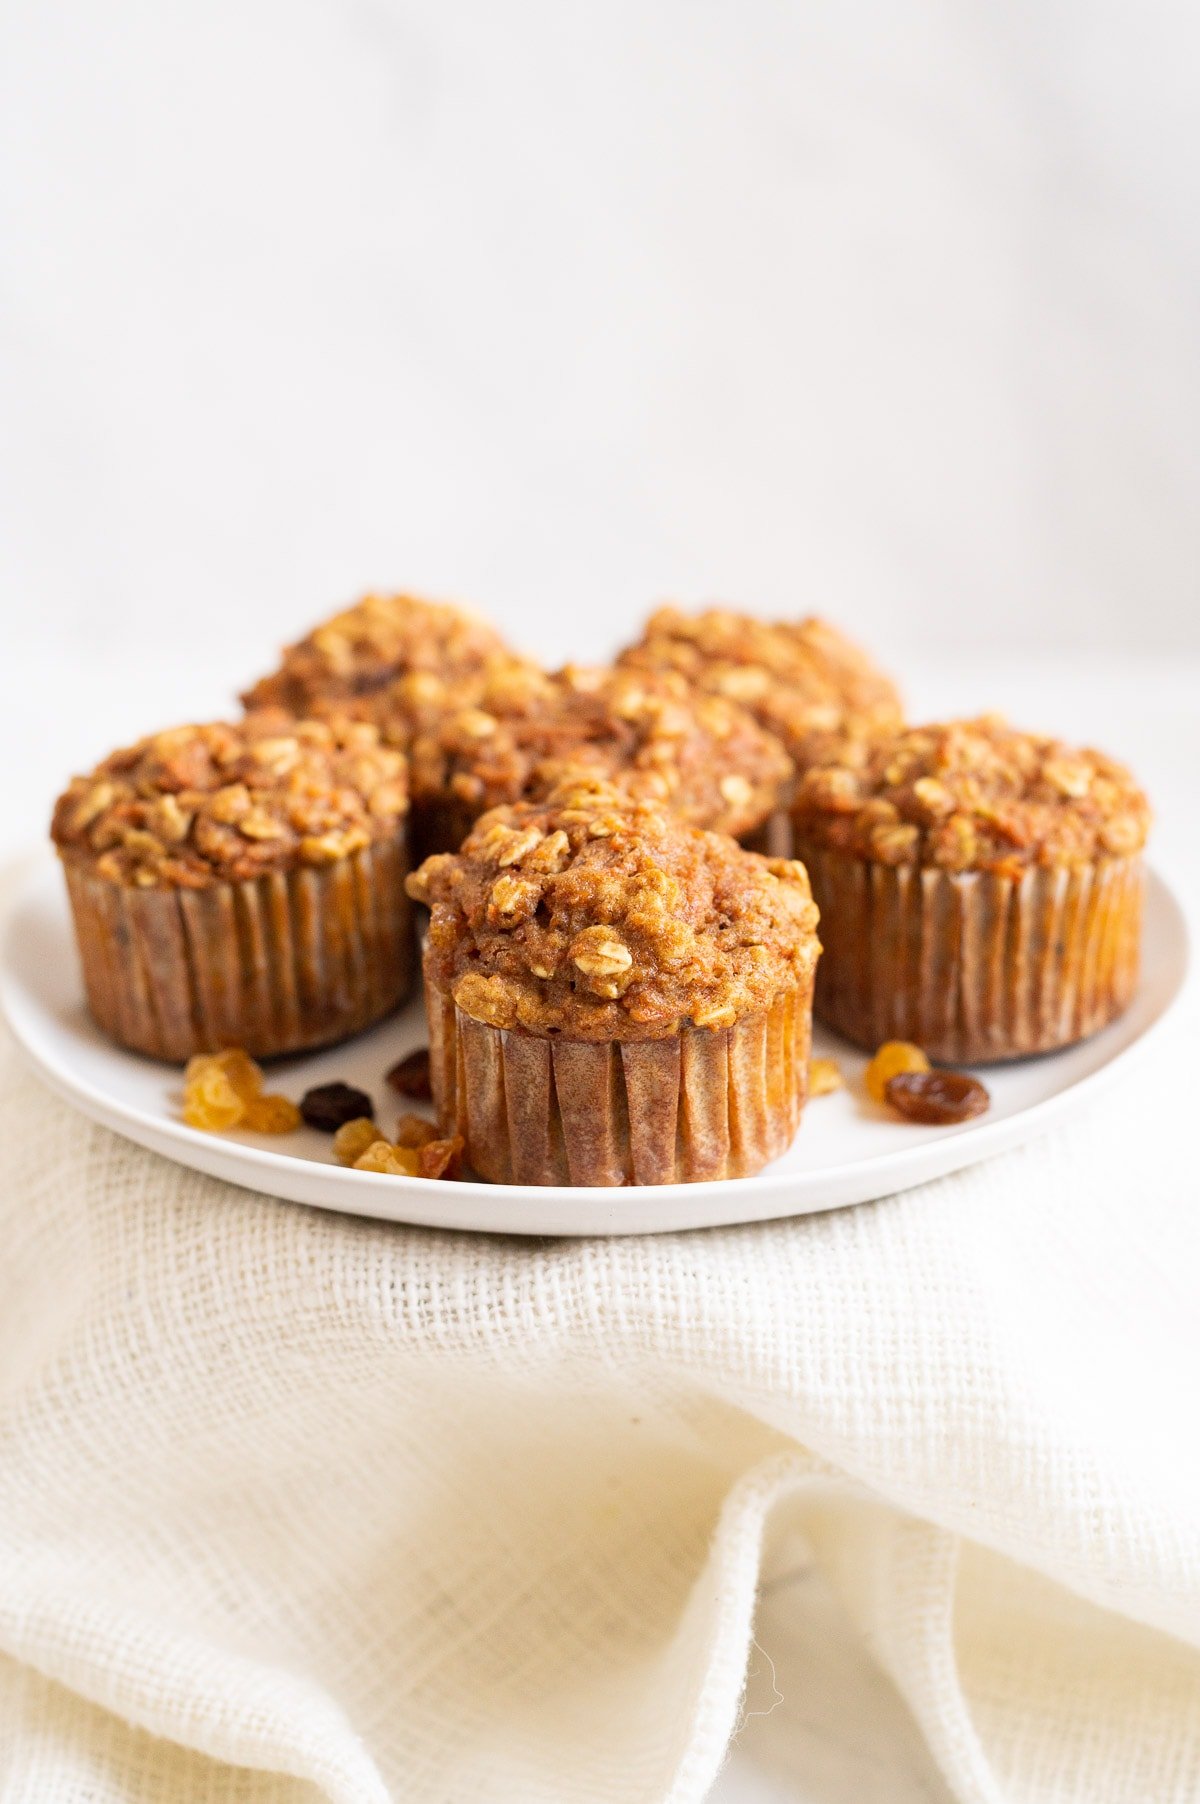 Six healthy carrot muffins on white plate.